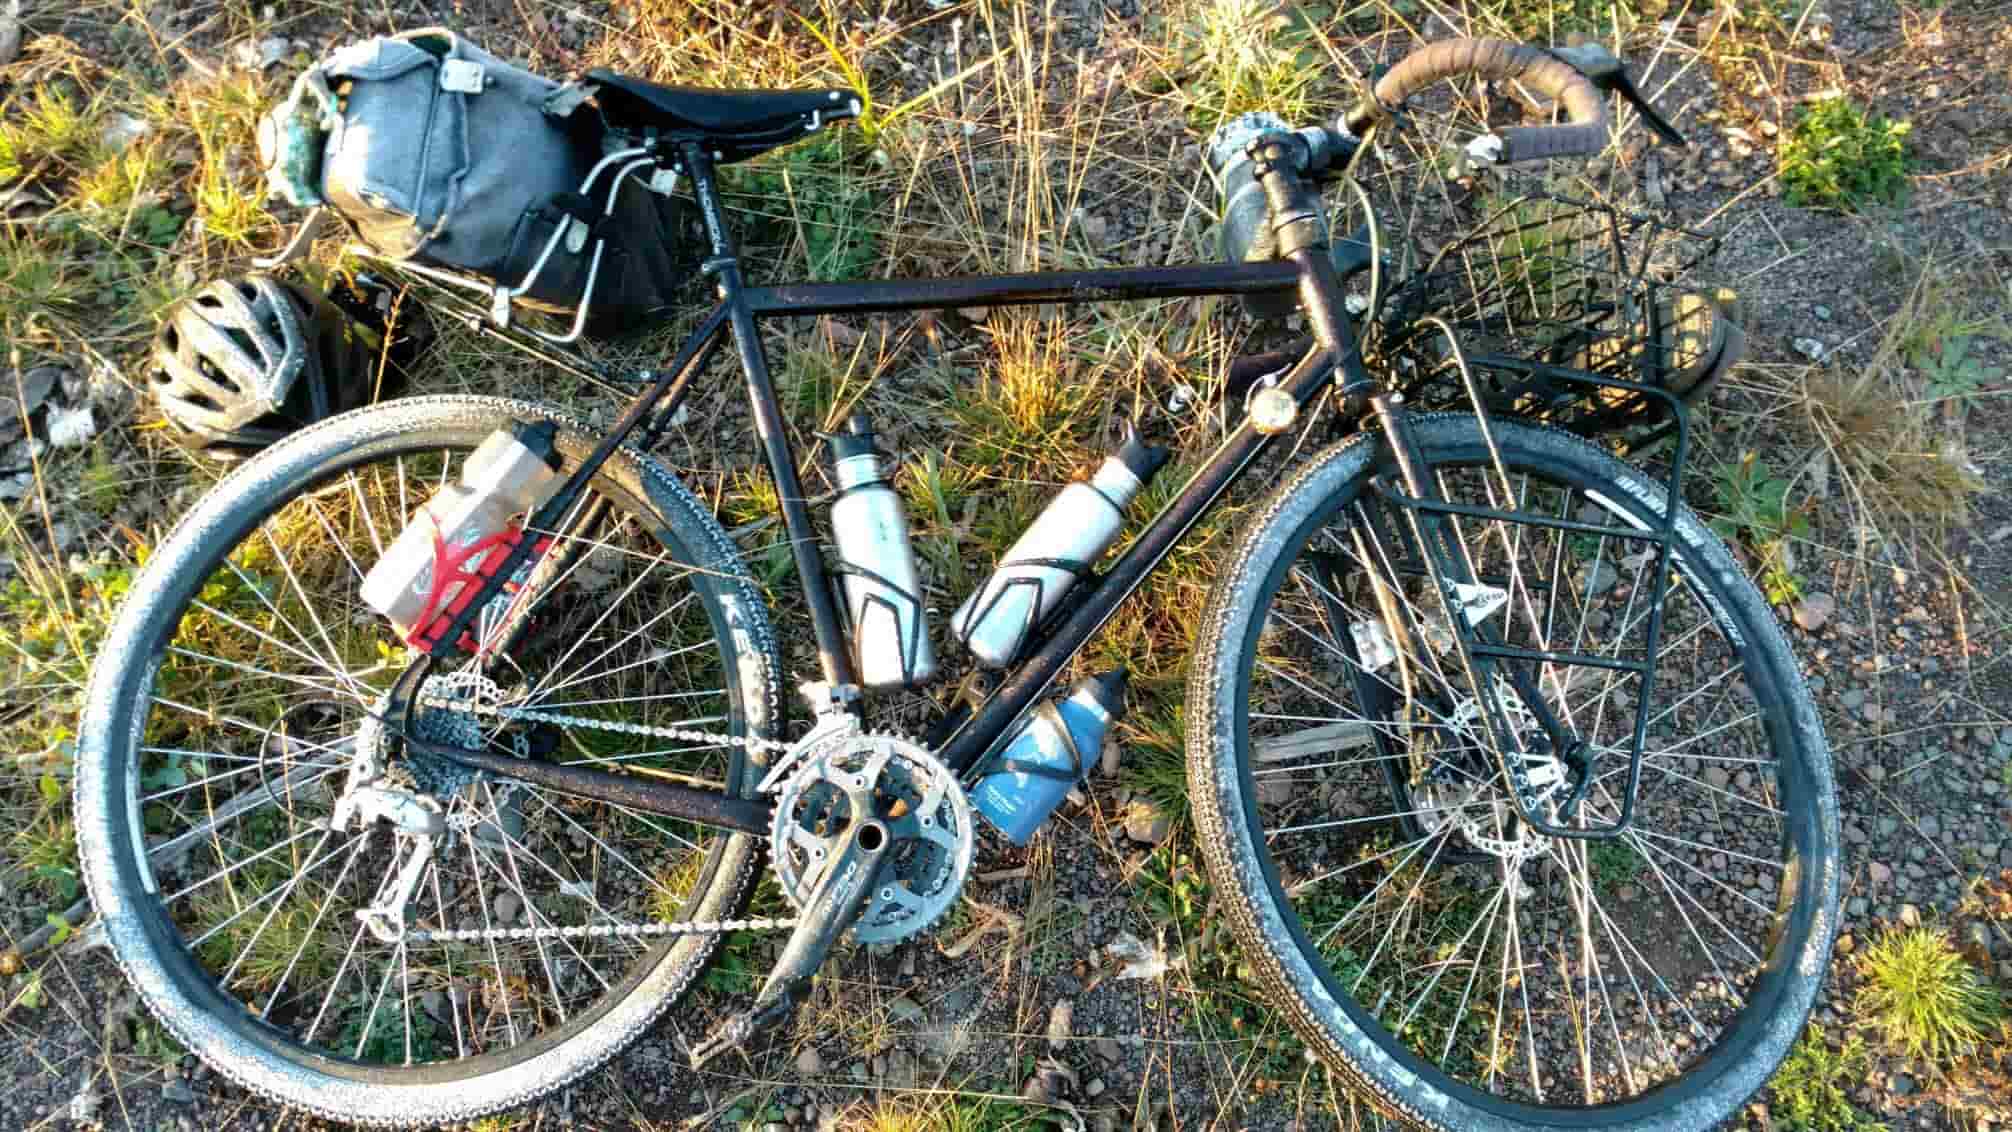 Downward left side view of a bike loaded with gear, laying on it's left side in gravel and weeds